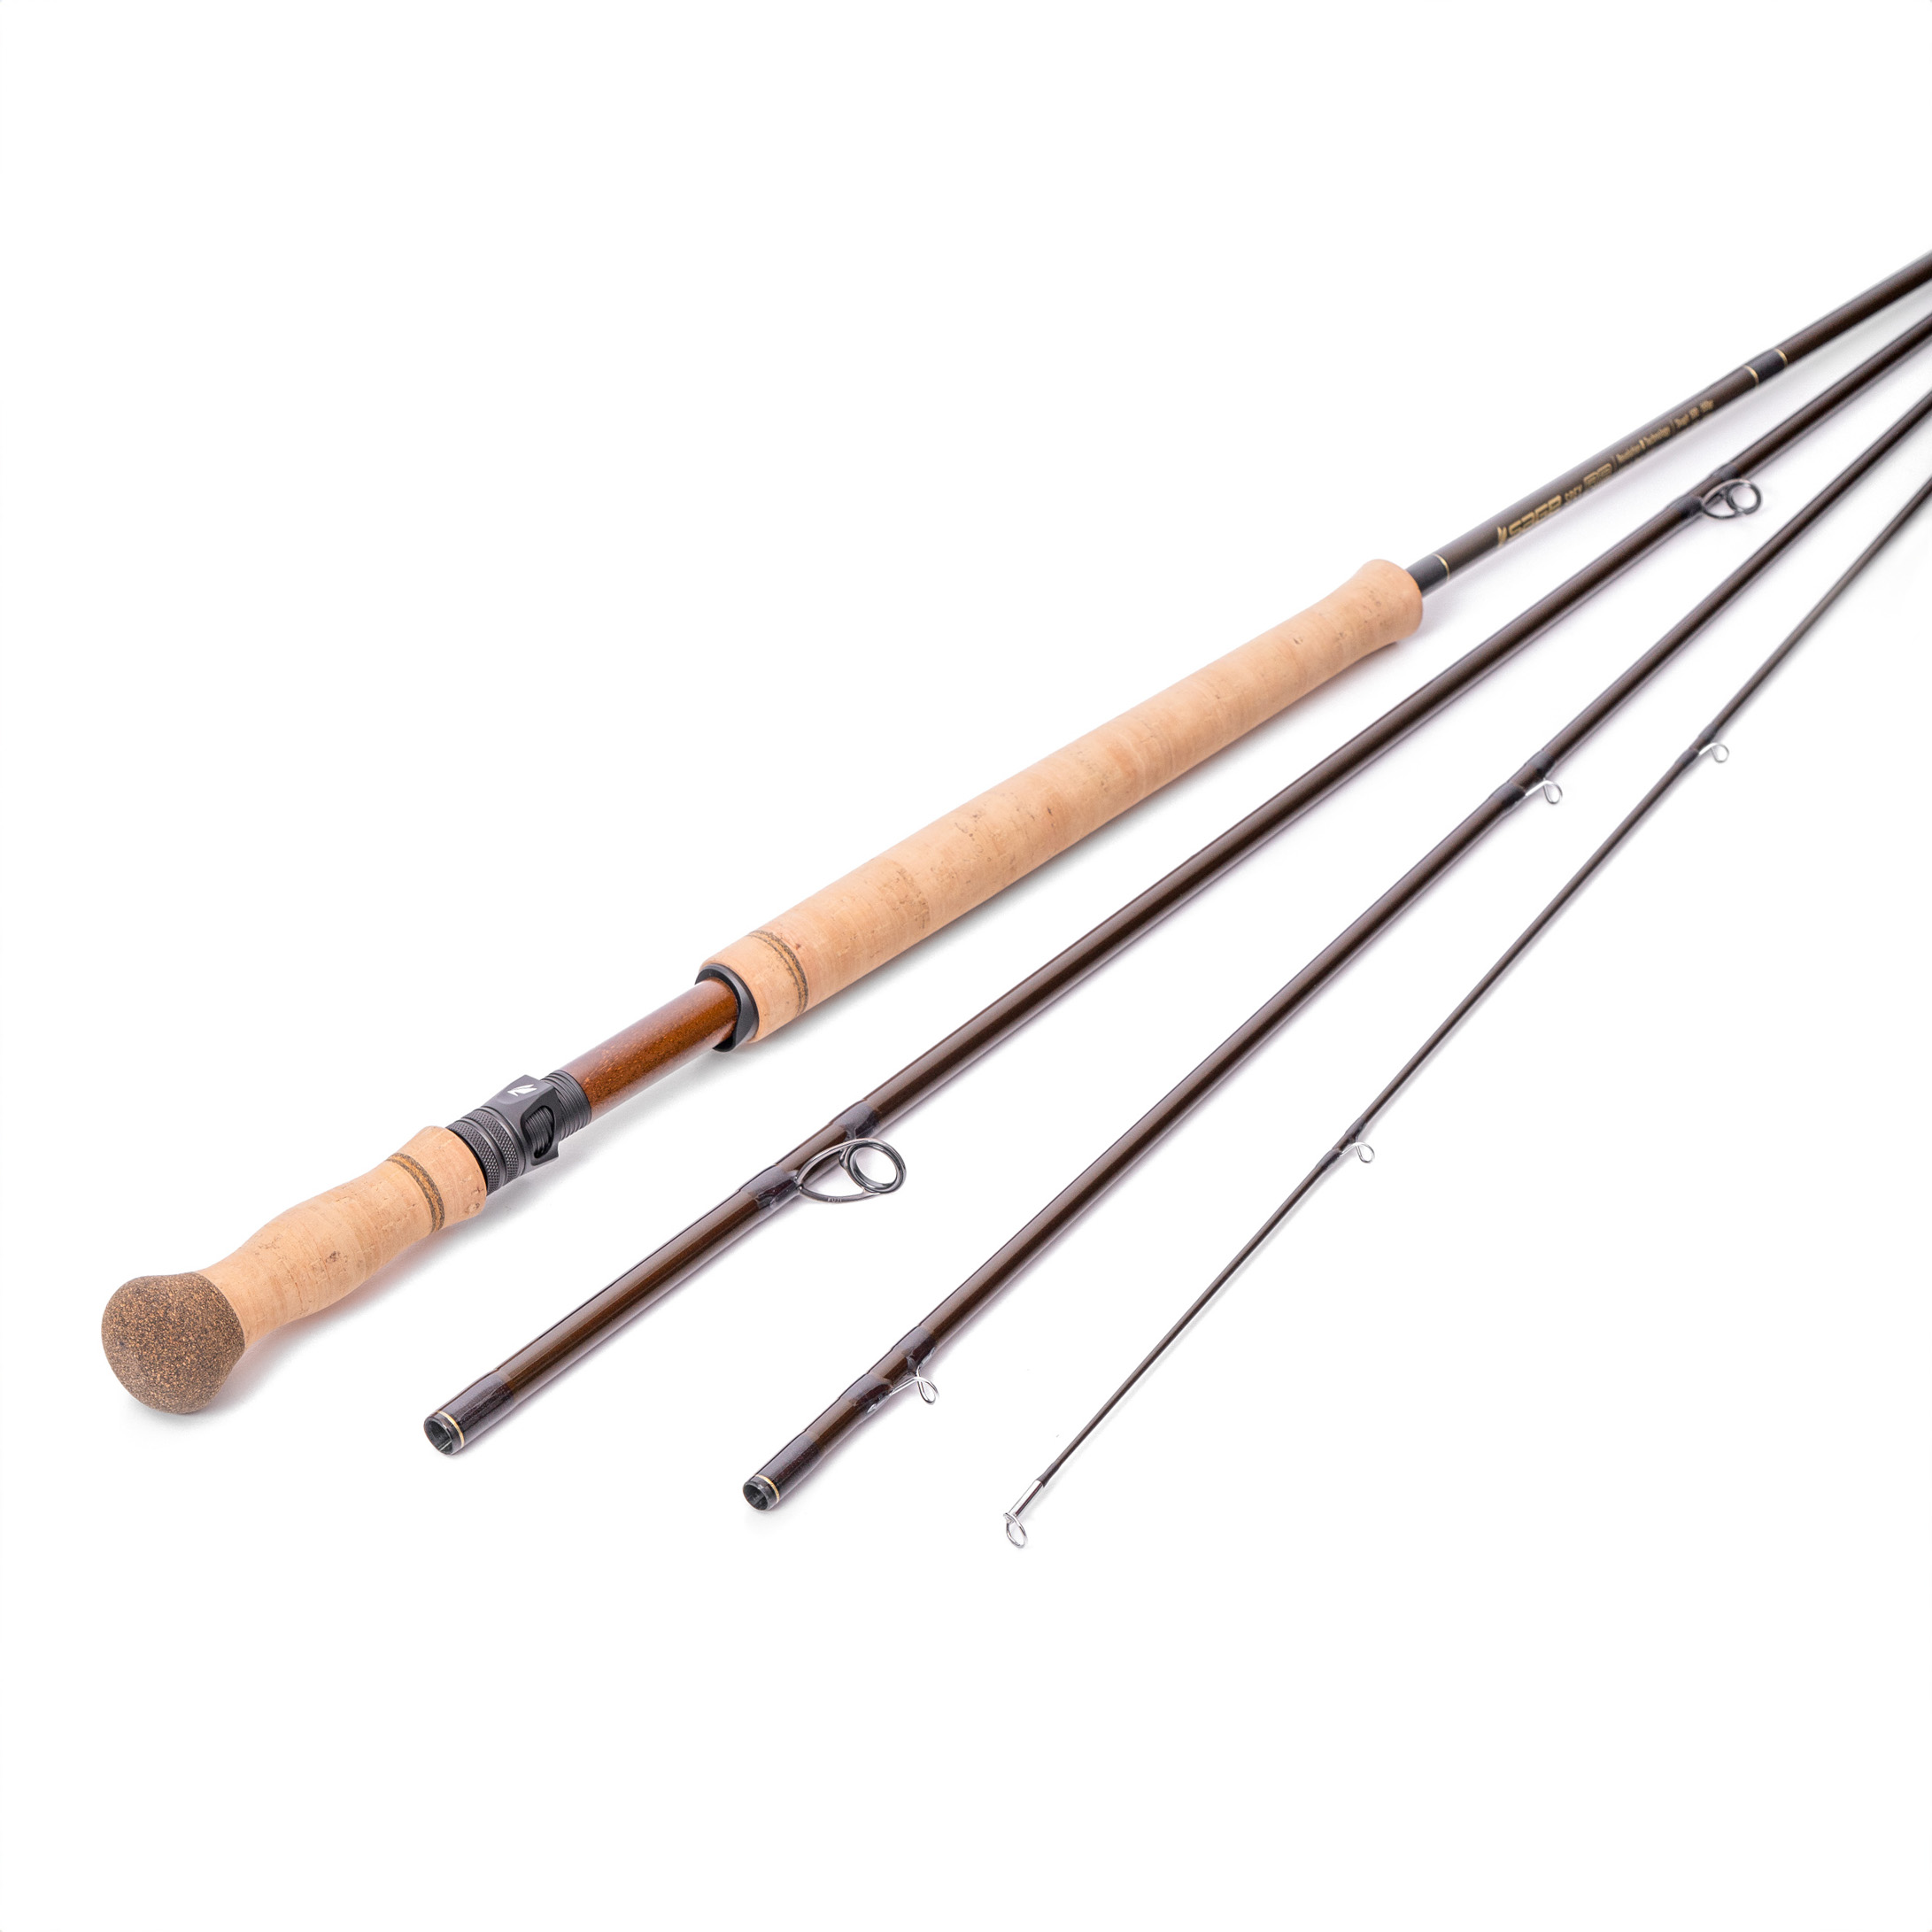 Sage Spey R8 DH Fly Rod – Guide Flyfishing, Fly Fishing Rods, Reels, Sage, Redington, RIO